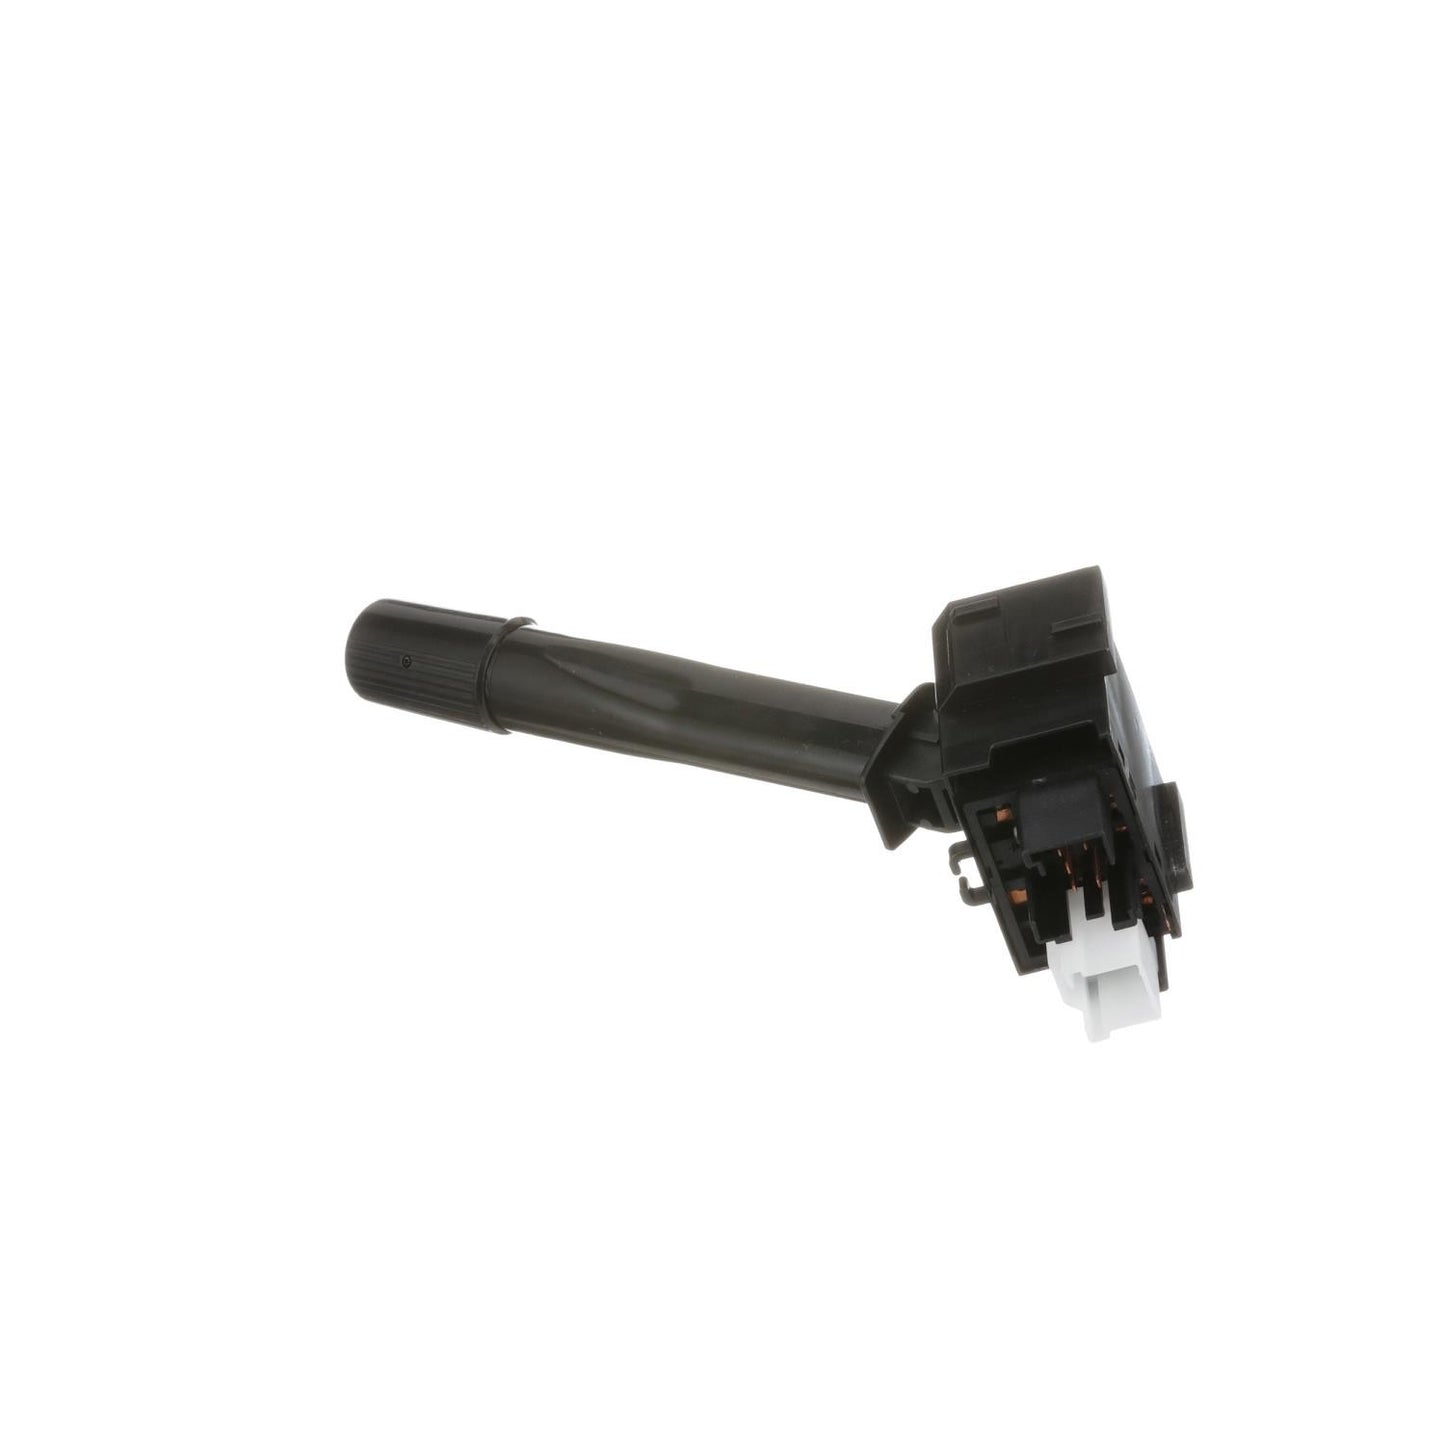 Other View of Windshield Wiper Switch STANDARD IGNITION DS-1392